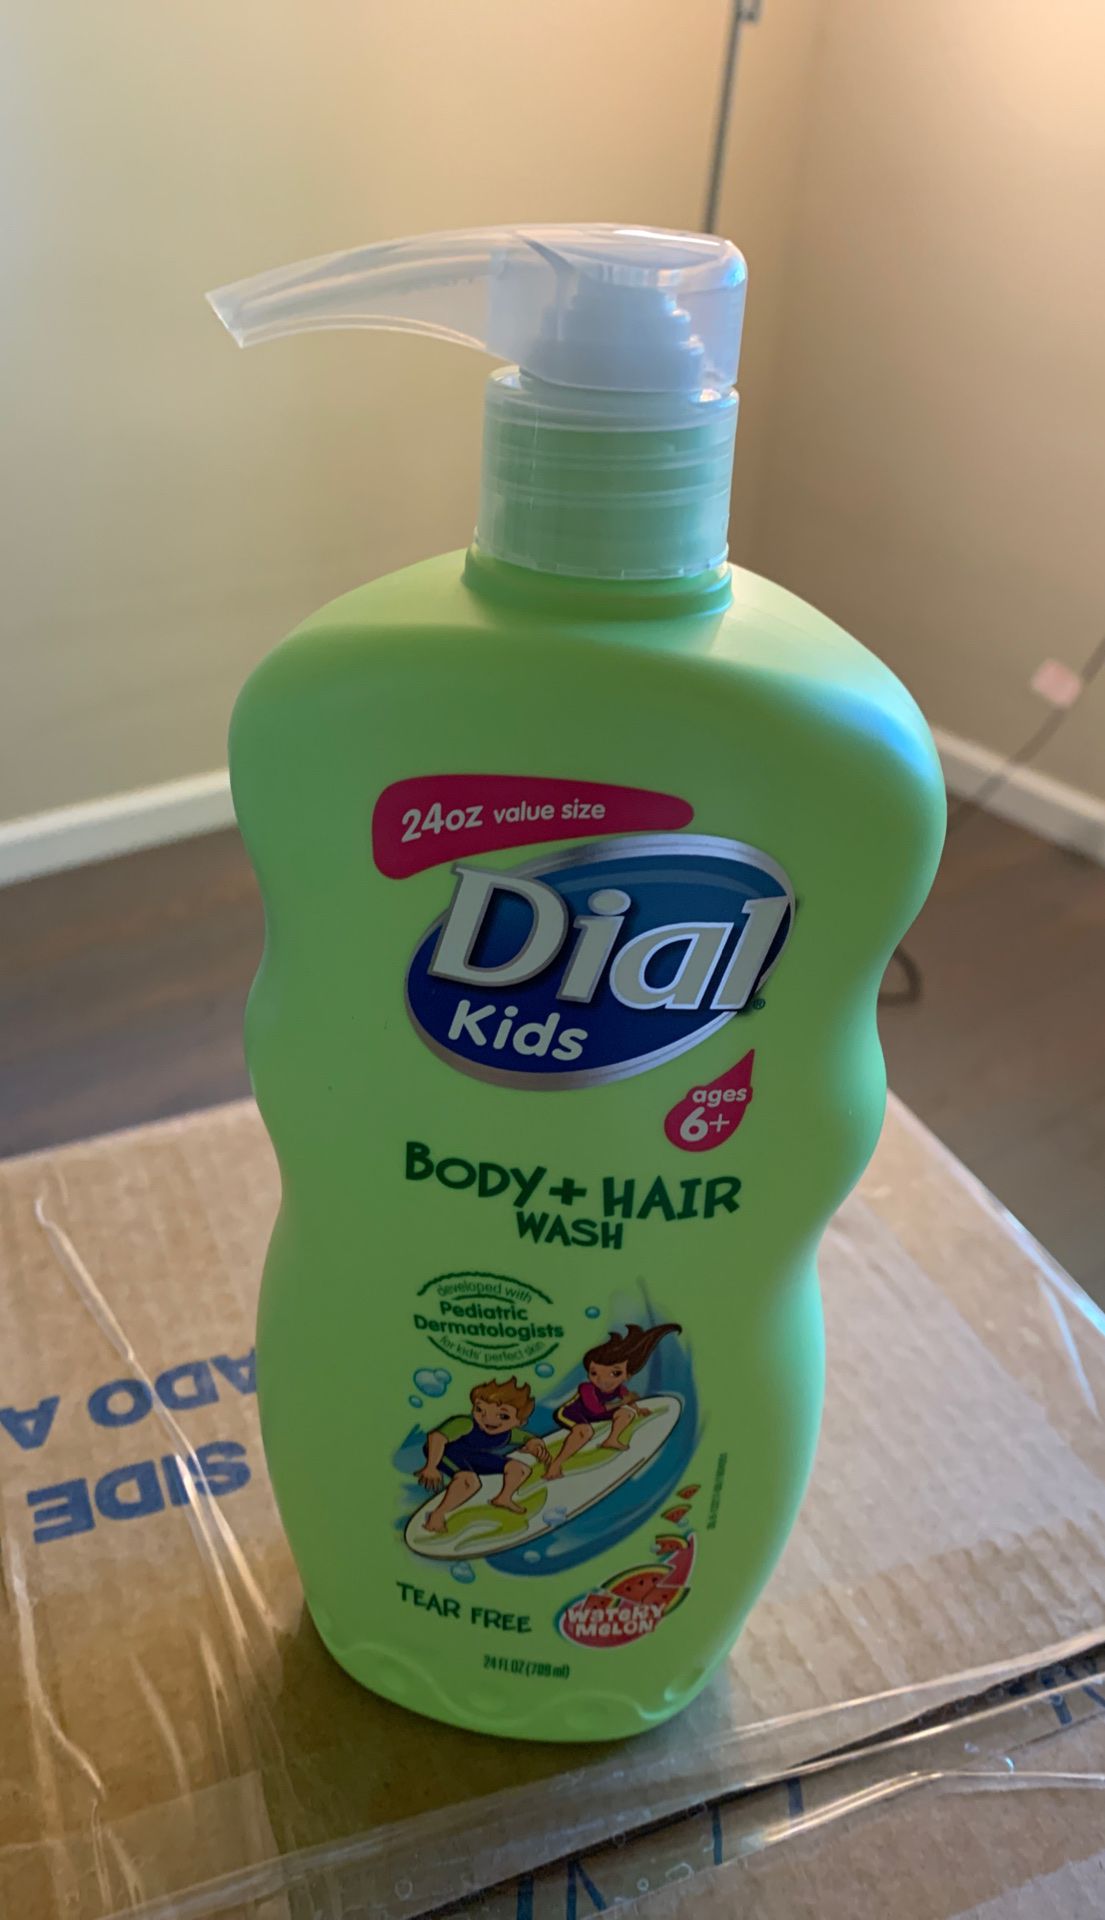 Brand new Dial Kids Body & Hair wash 50% off retail